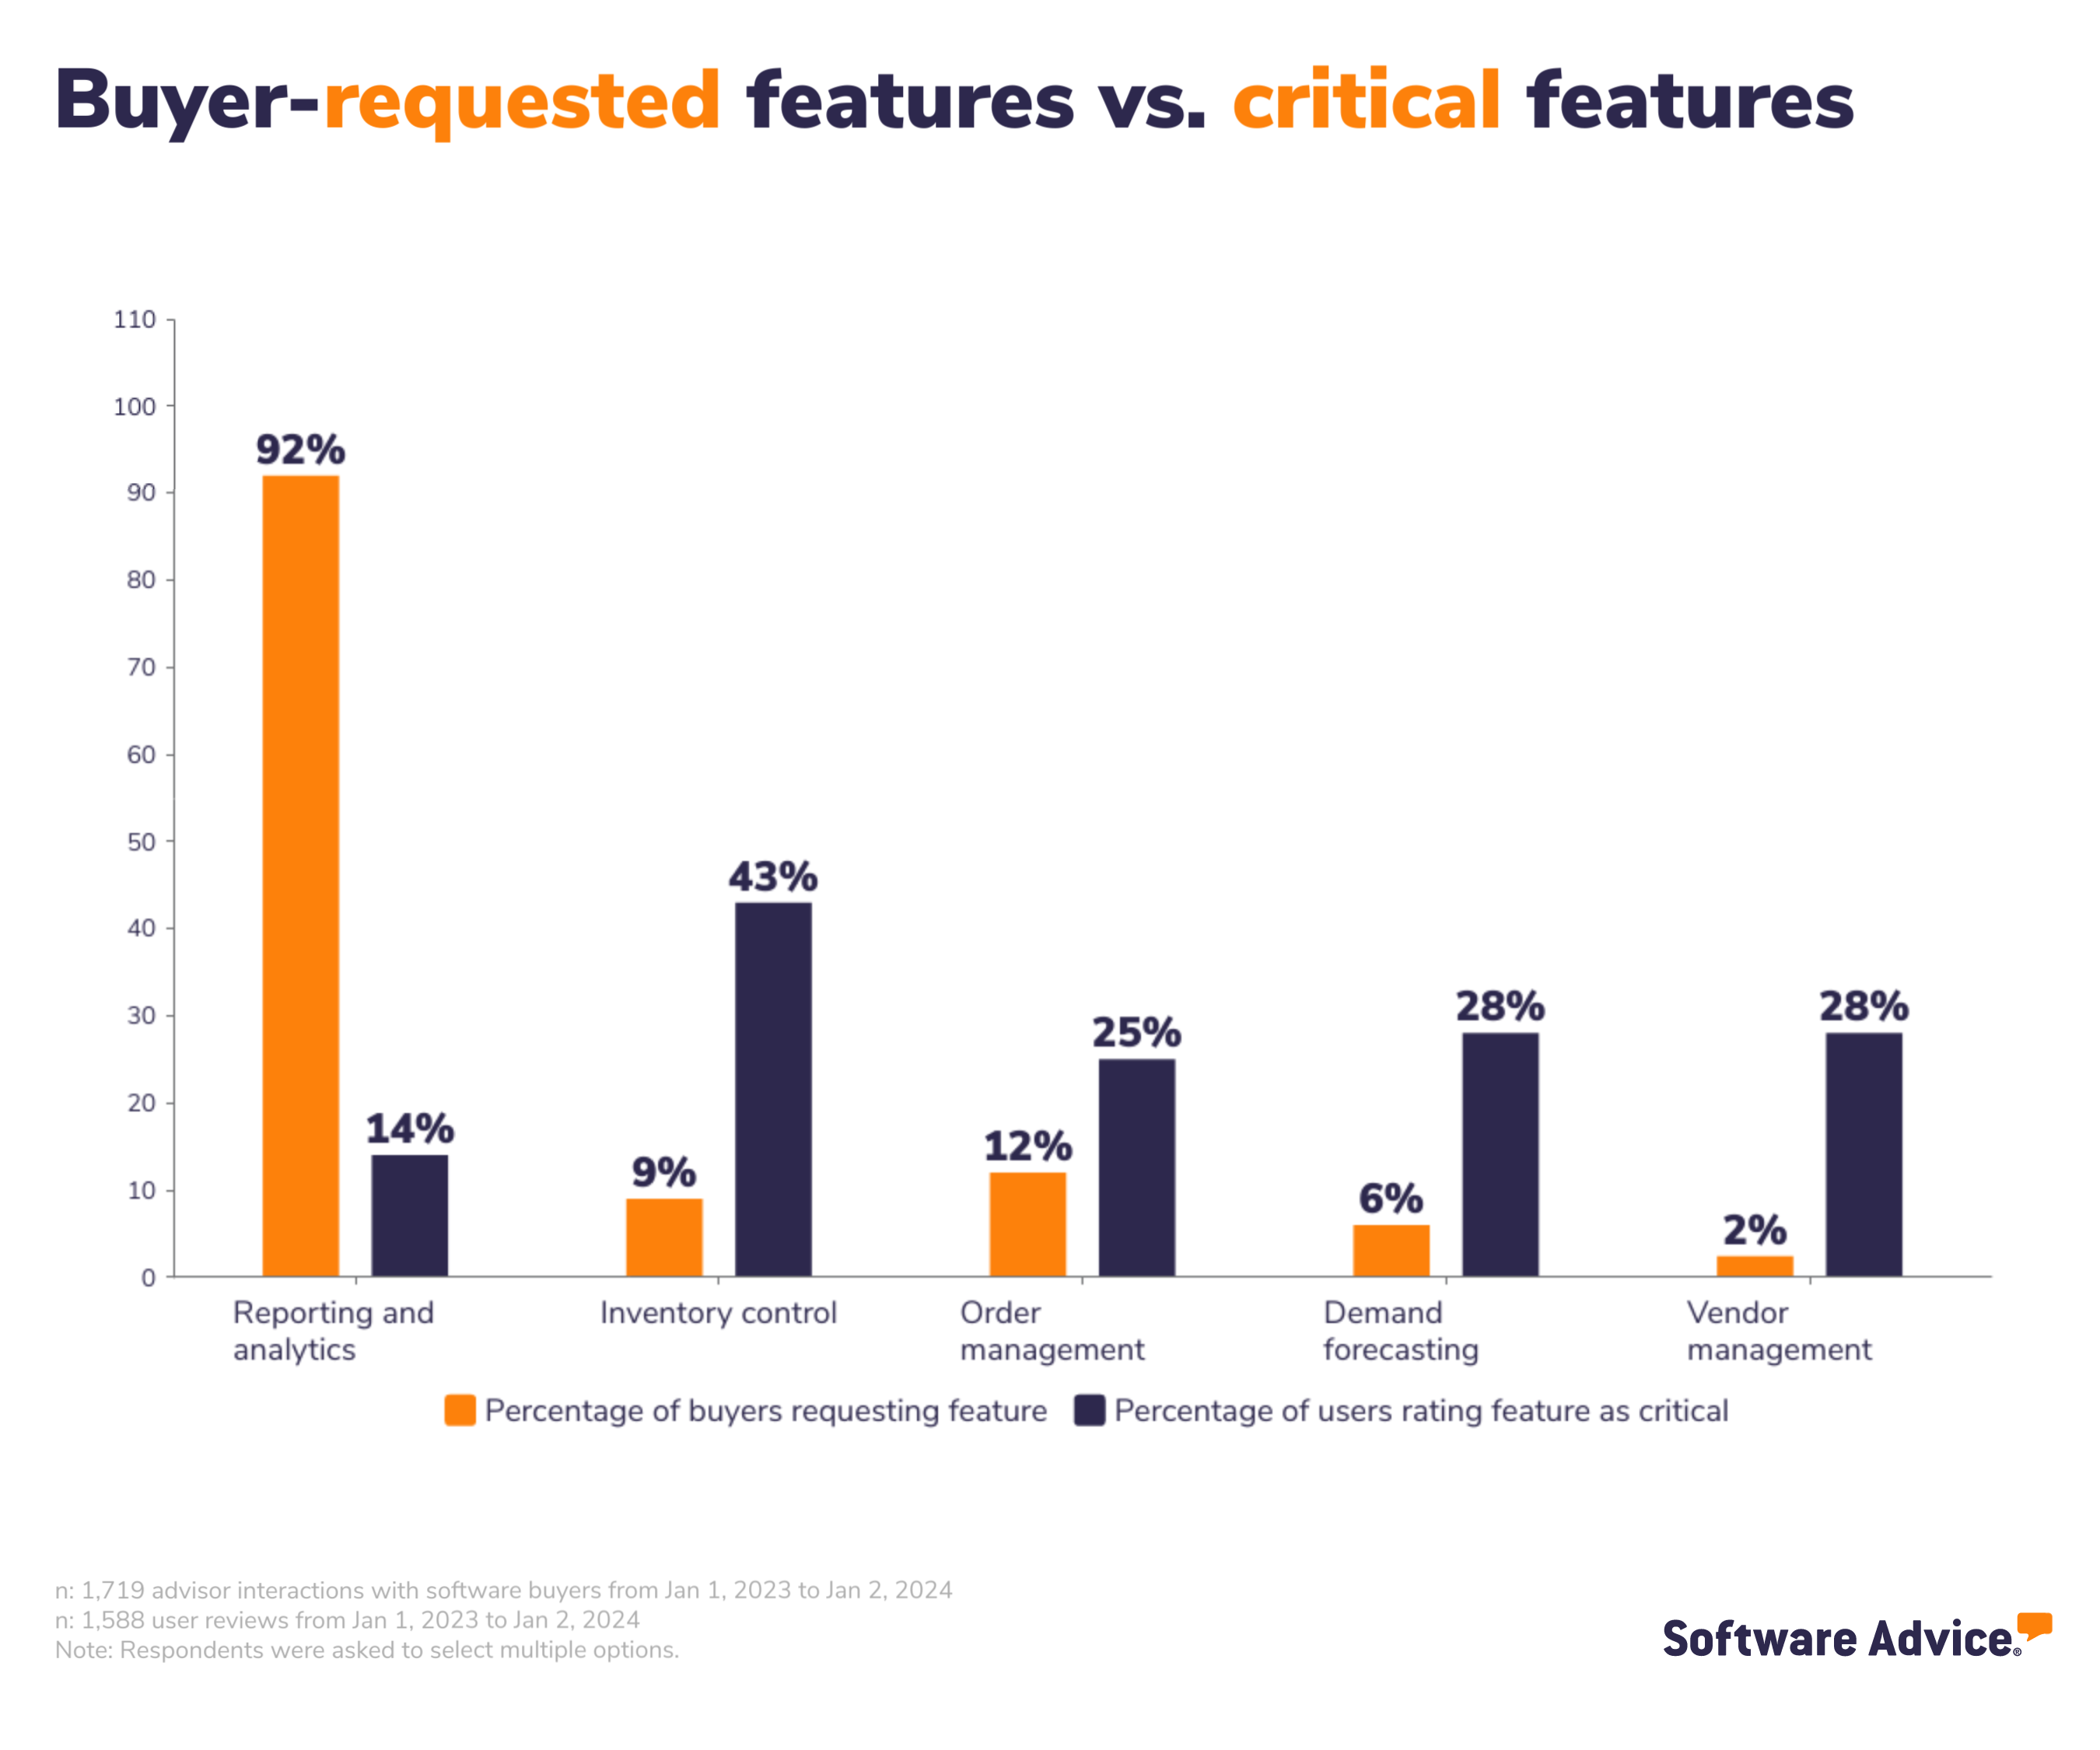 Buyer-requested features vs. critical features